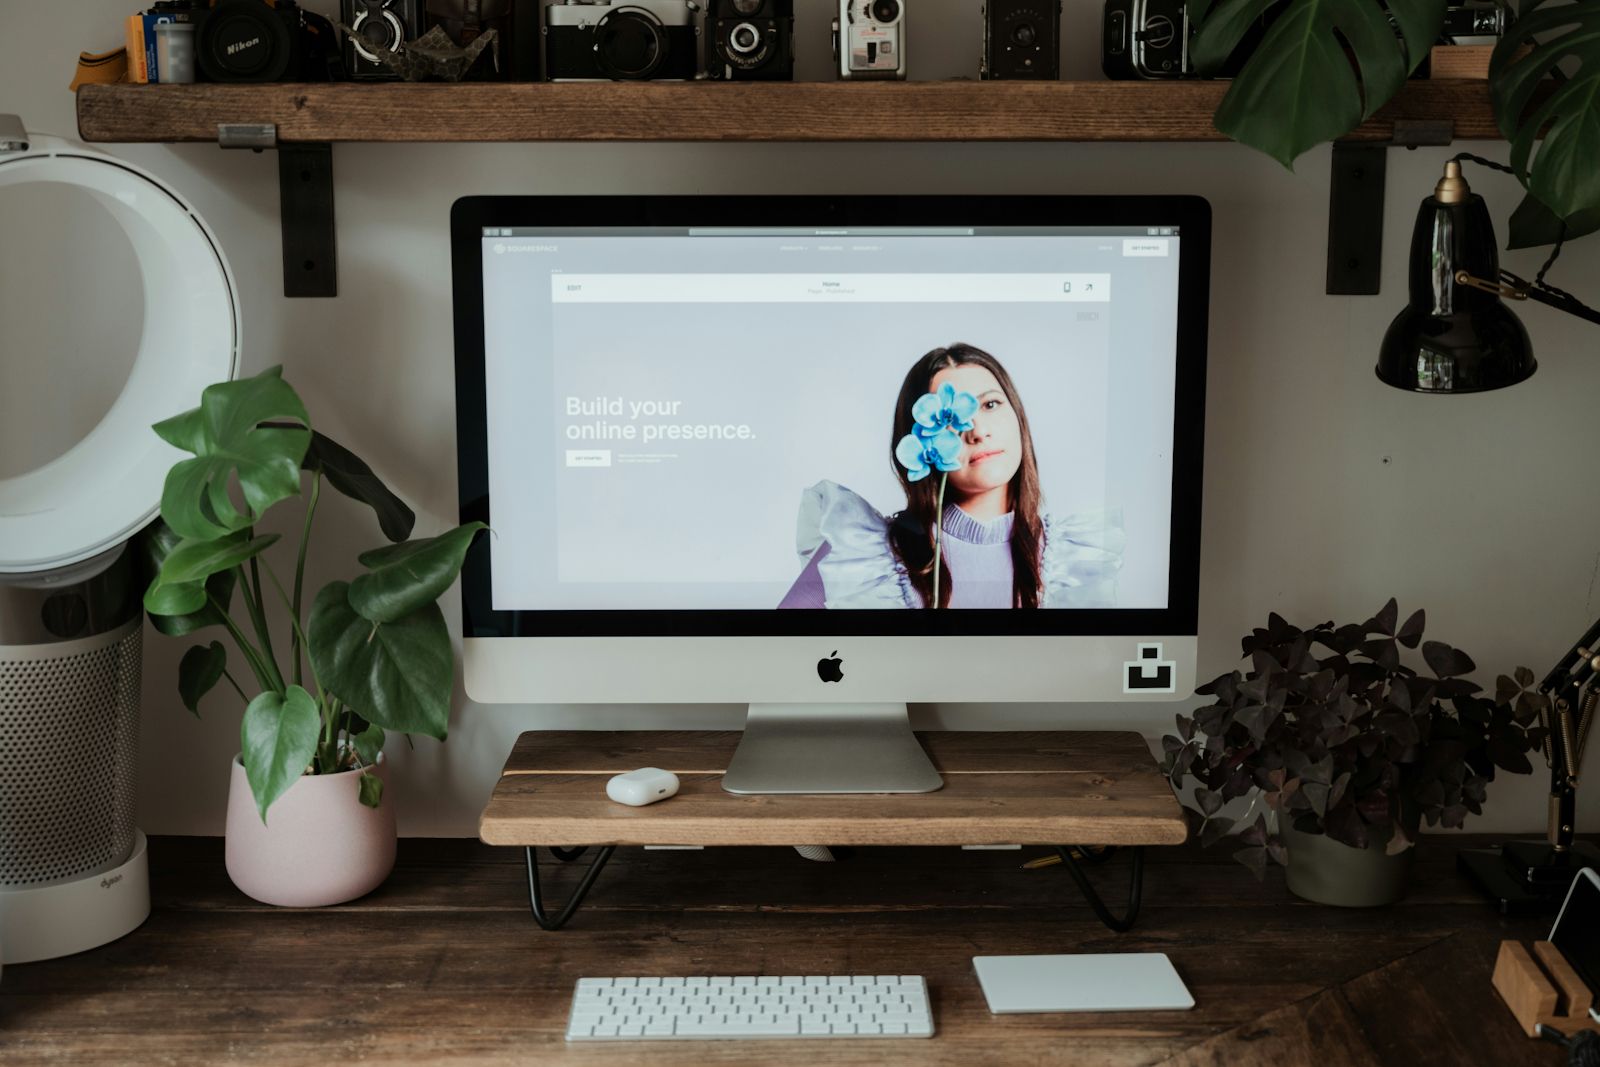 Make a booking website with Squarespace